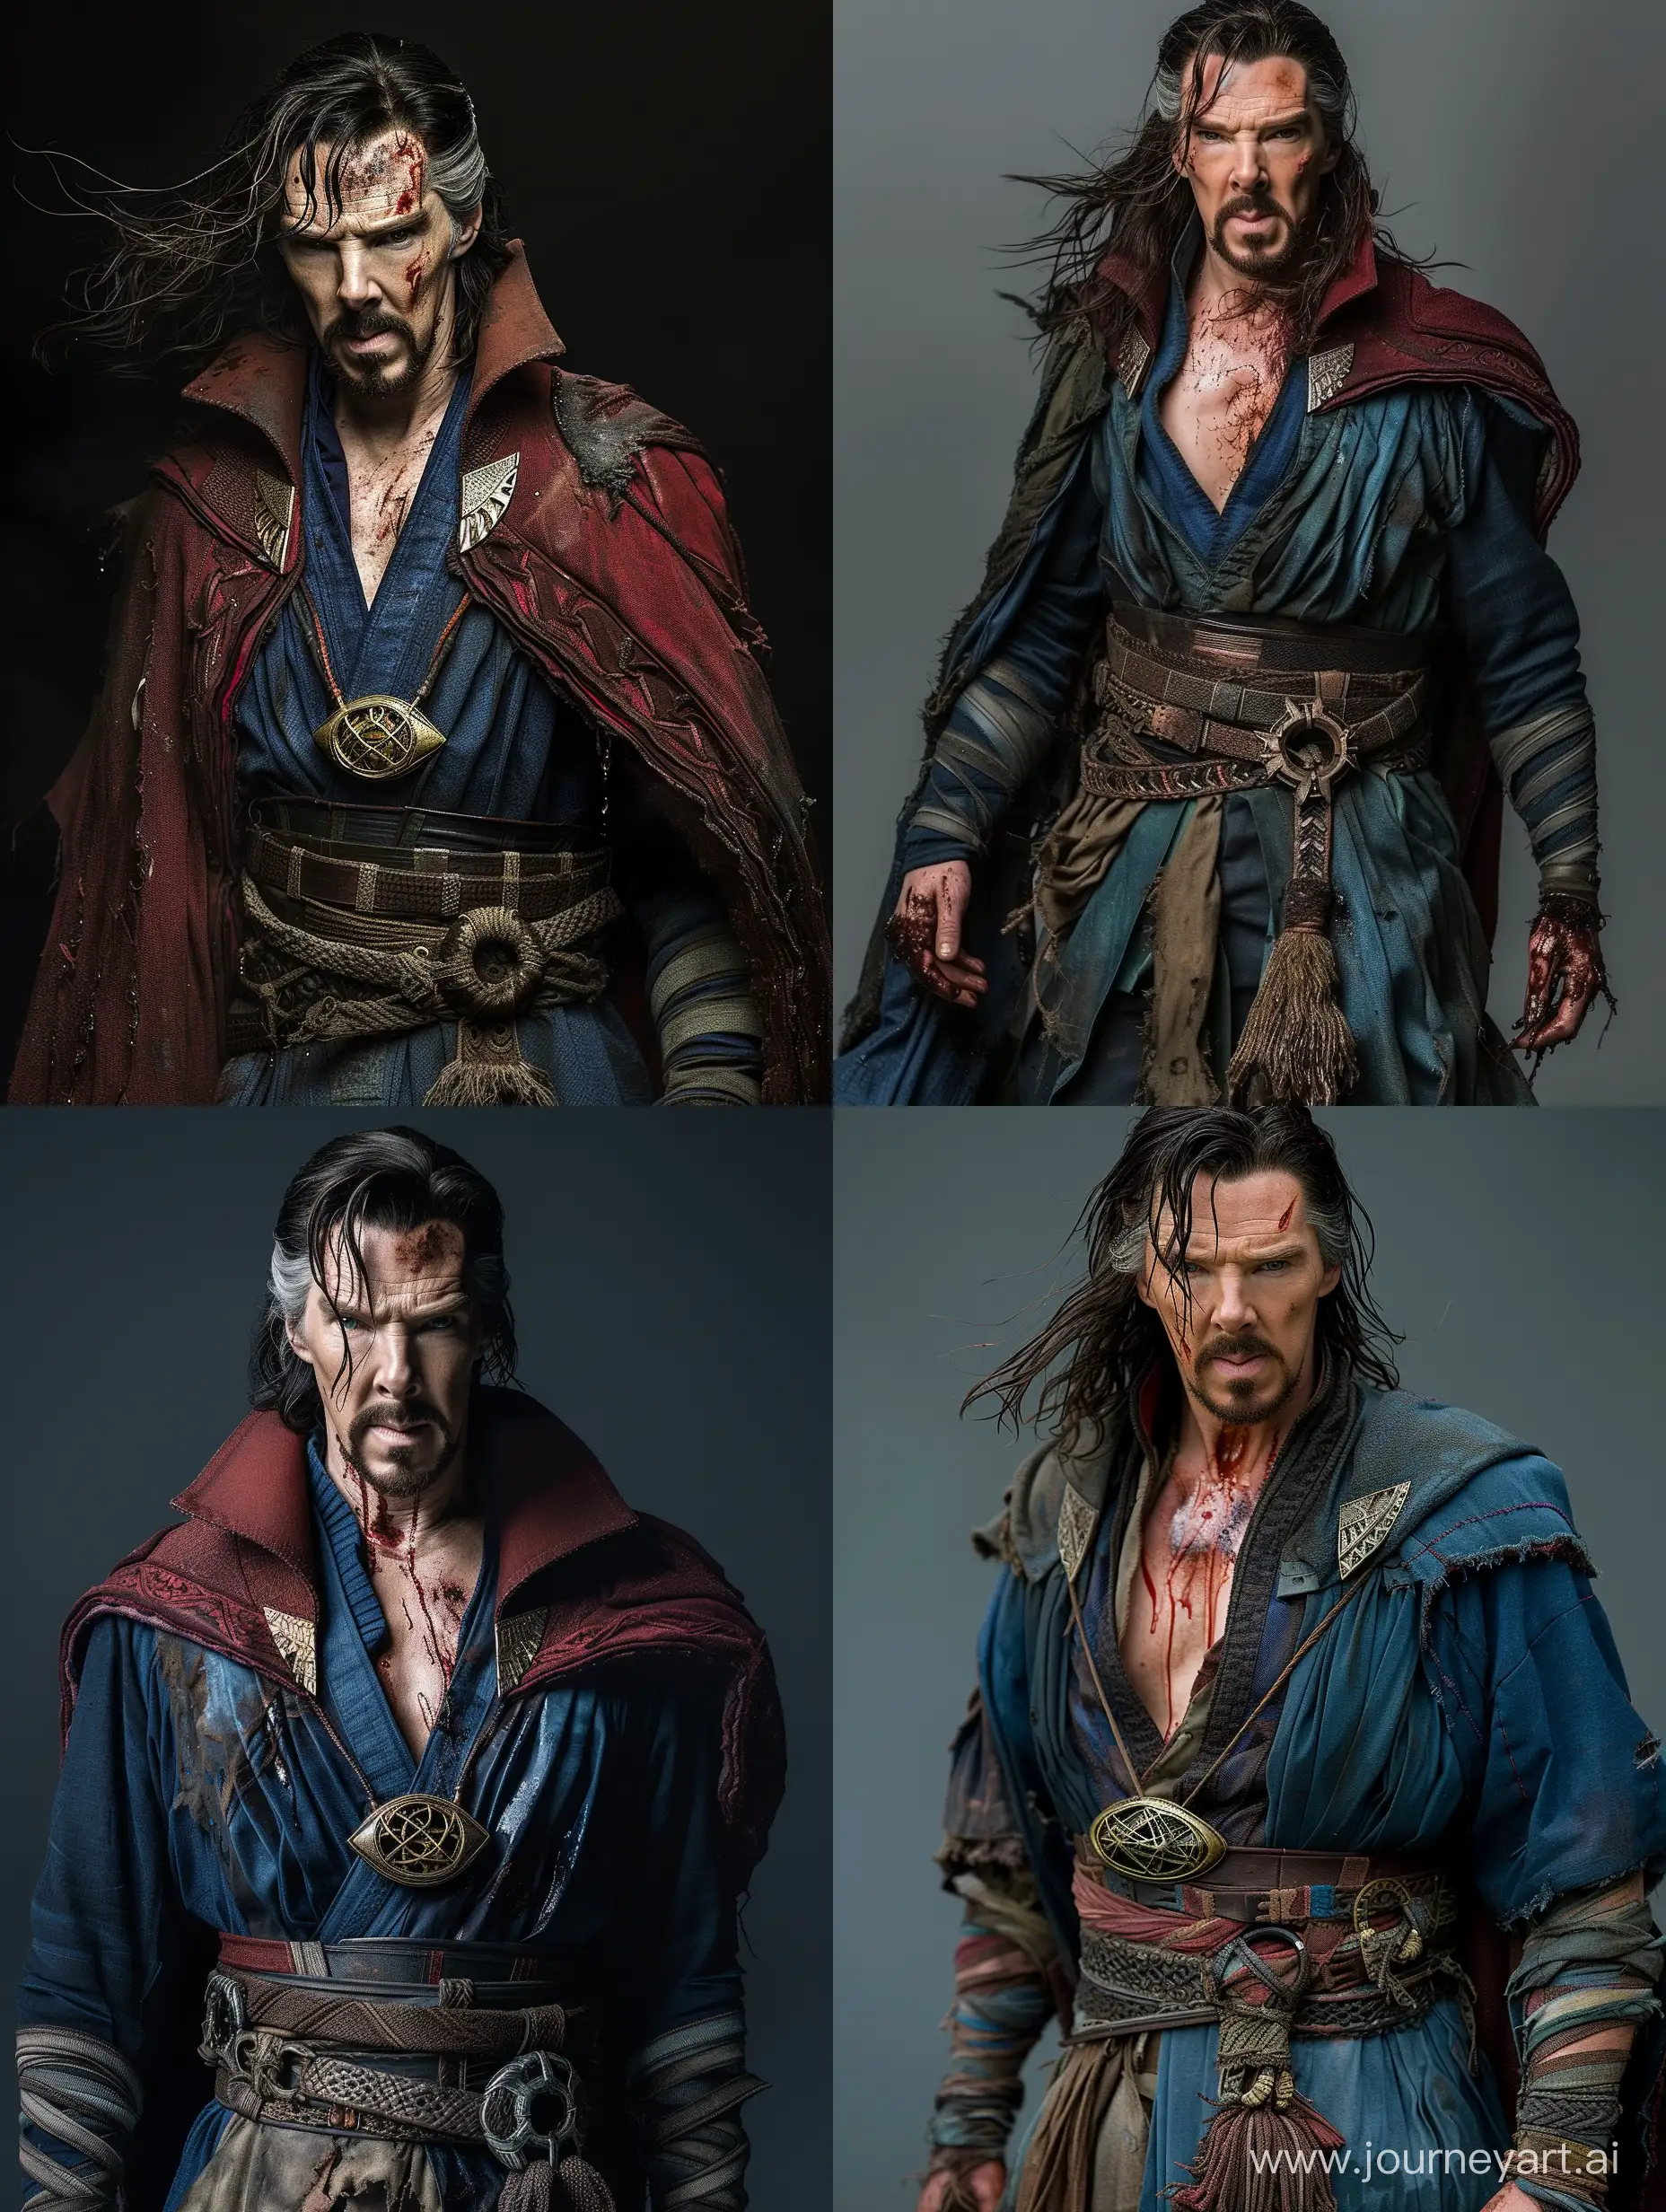 Doctor Strange with long hair, in ripped, tattered, ragged outfit revealing chest,wet